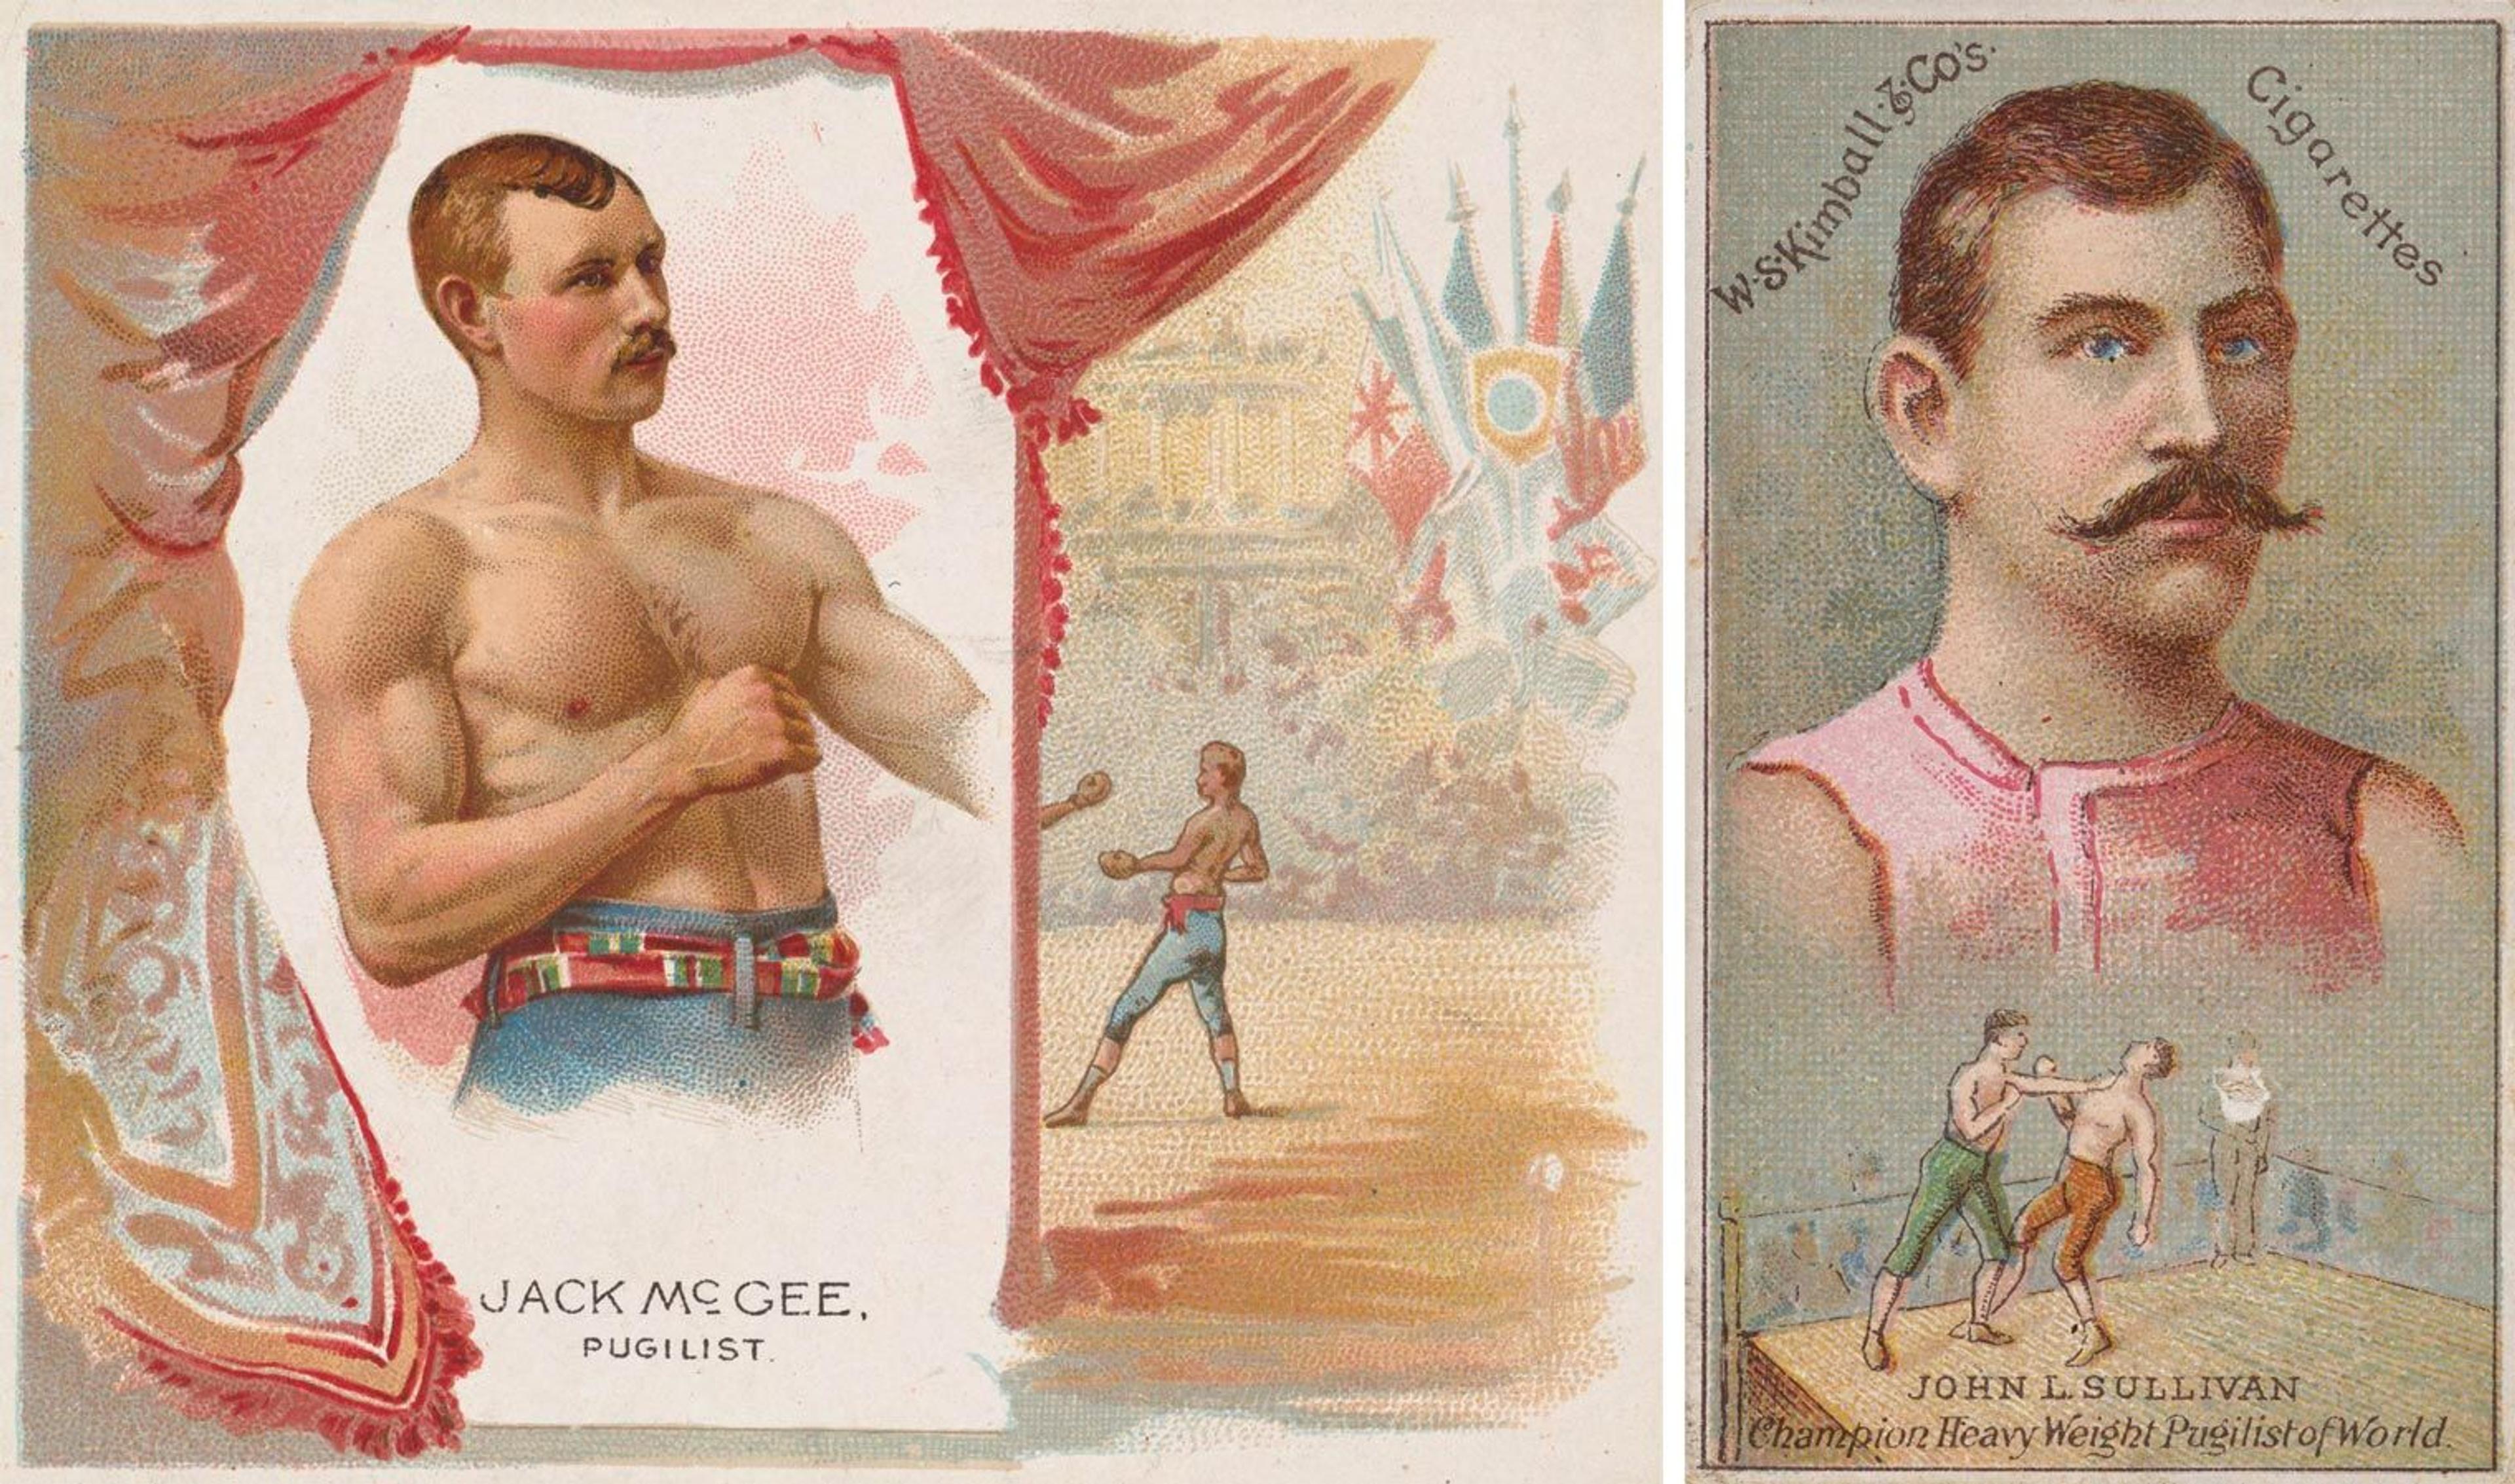 Two boxing cards from the 1880s, one depicting Jack McGee, and another John L. Sullivan